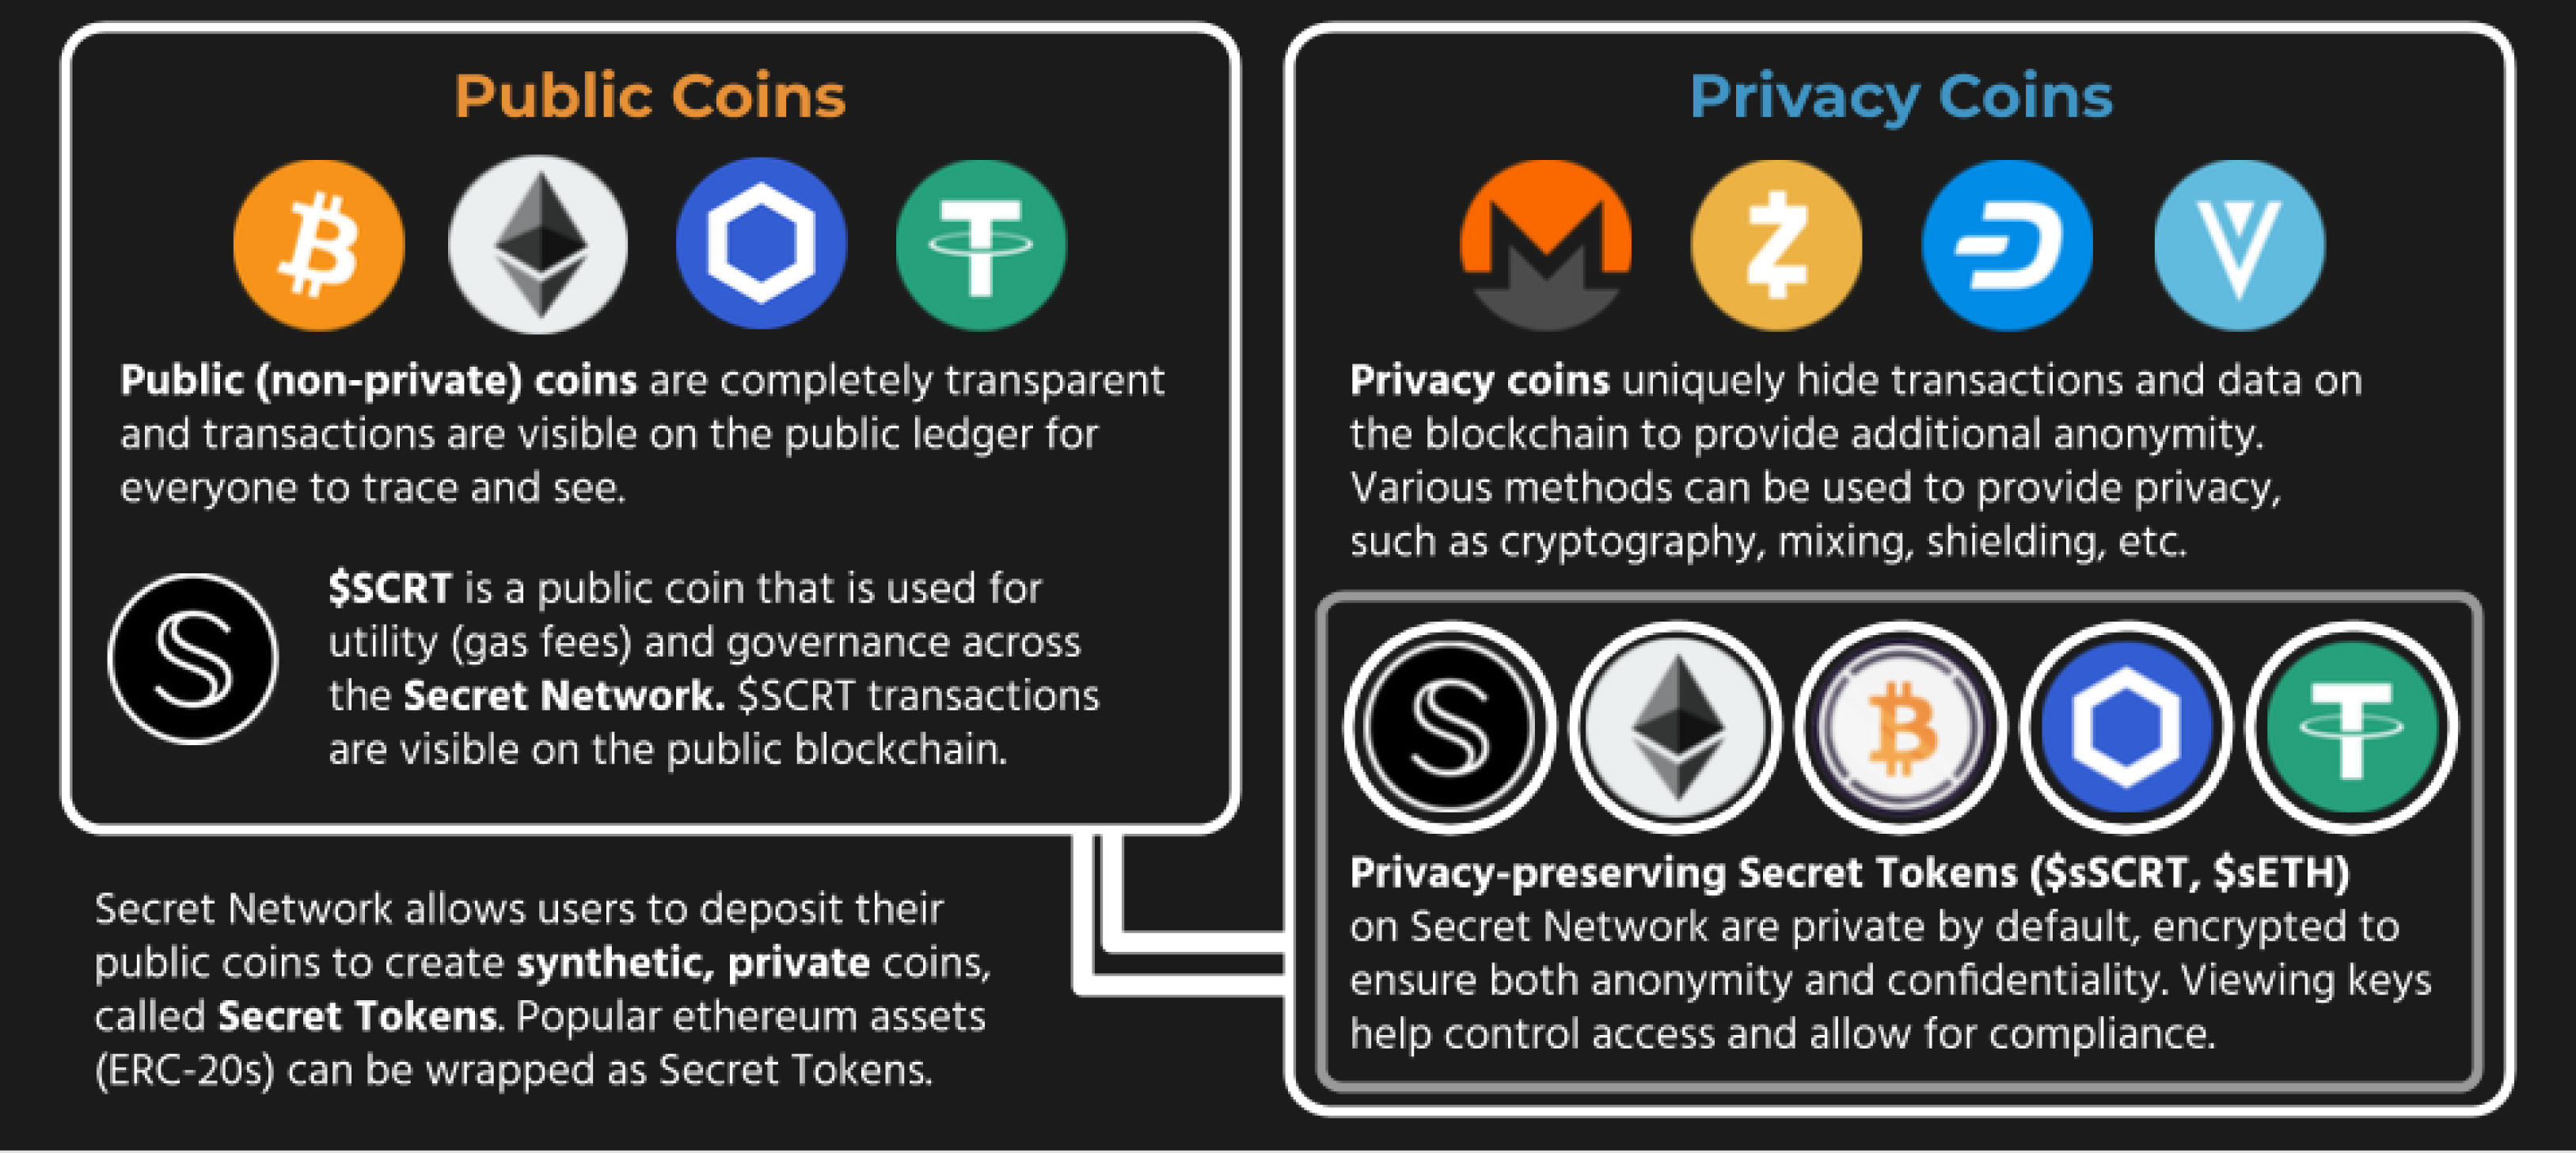 Secret_Network_-_Privacy_Coins 2.png